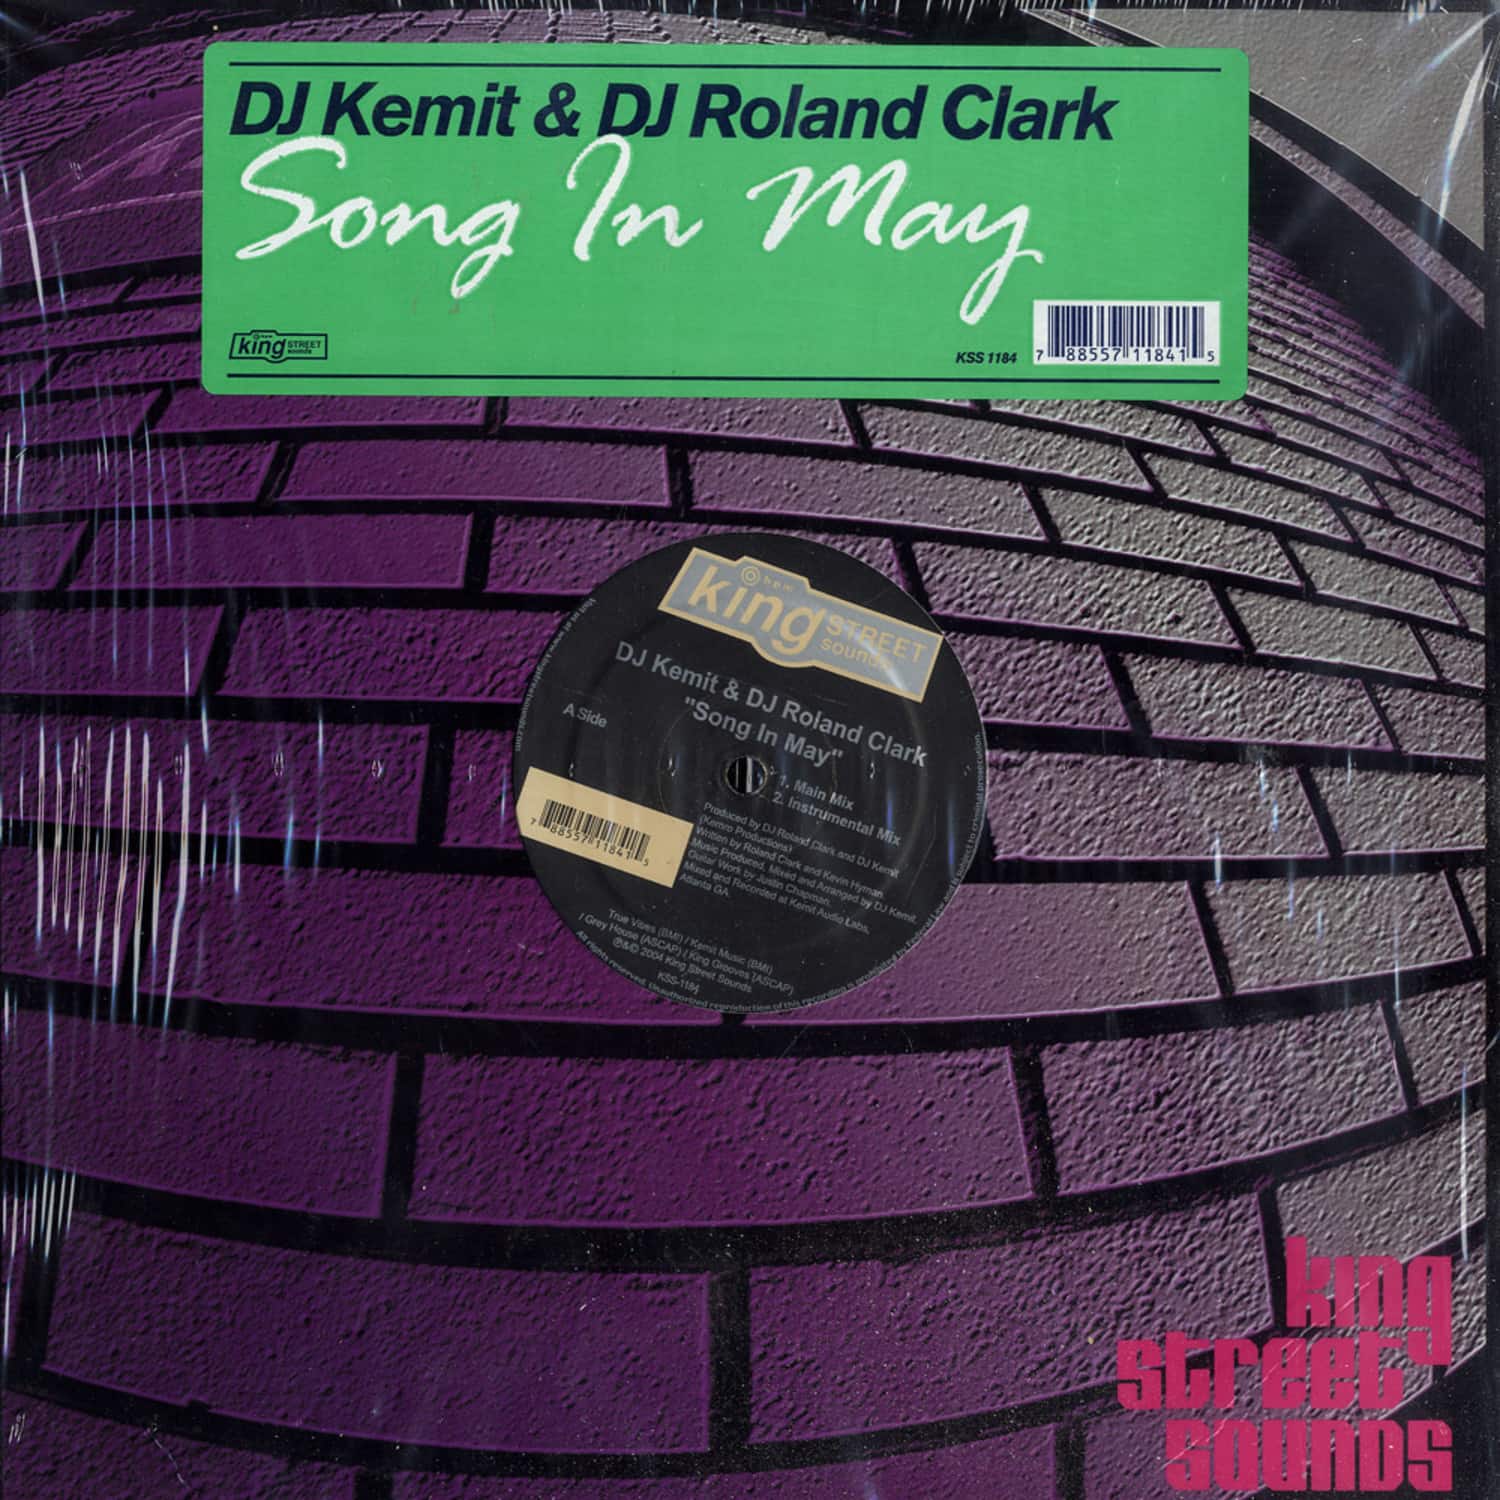 Dj Kemit / Roland Clark - SONG IN MAY